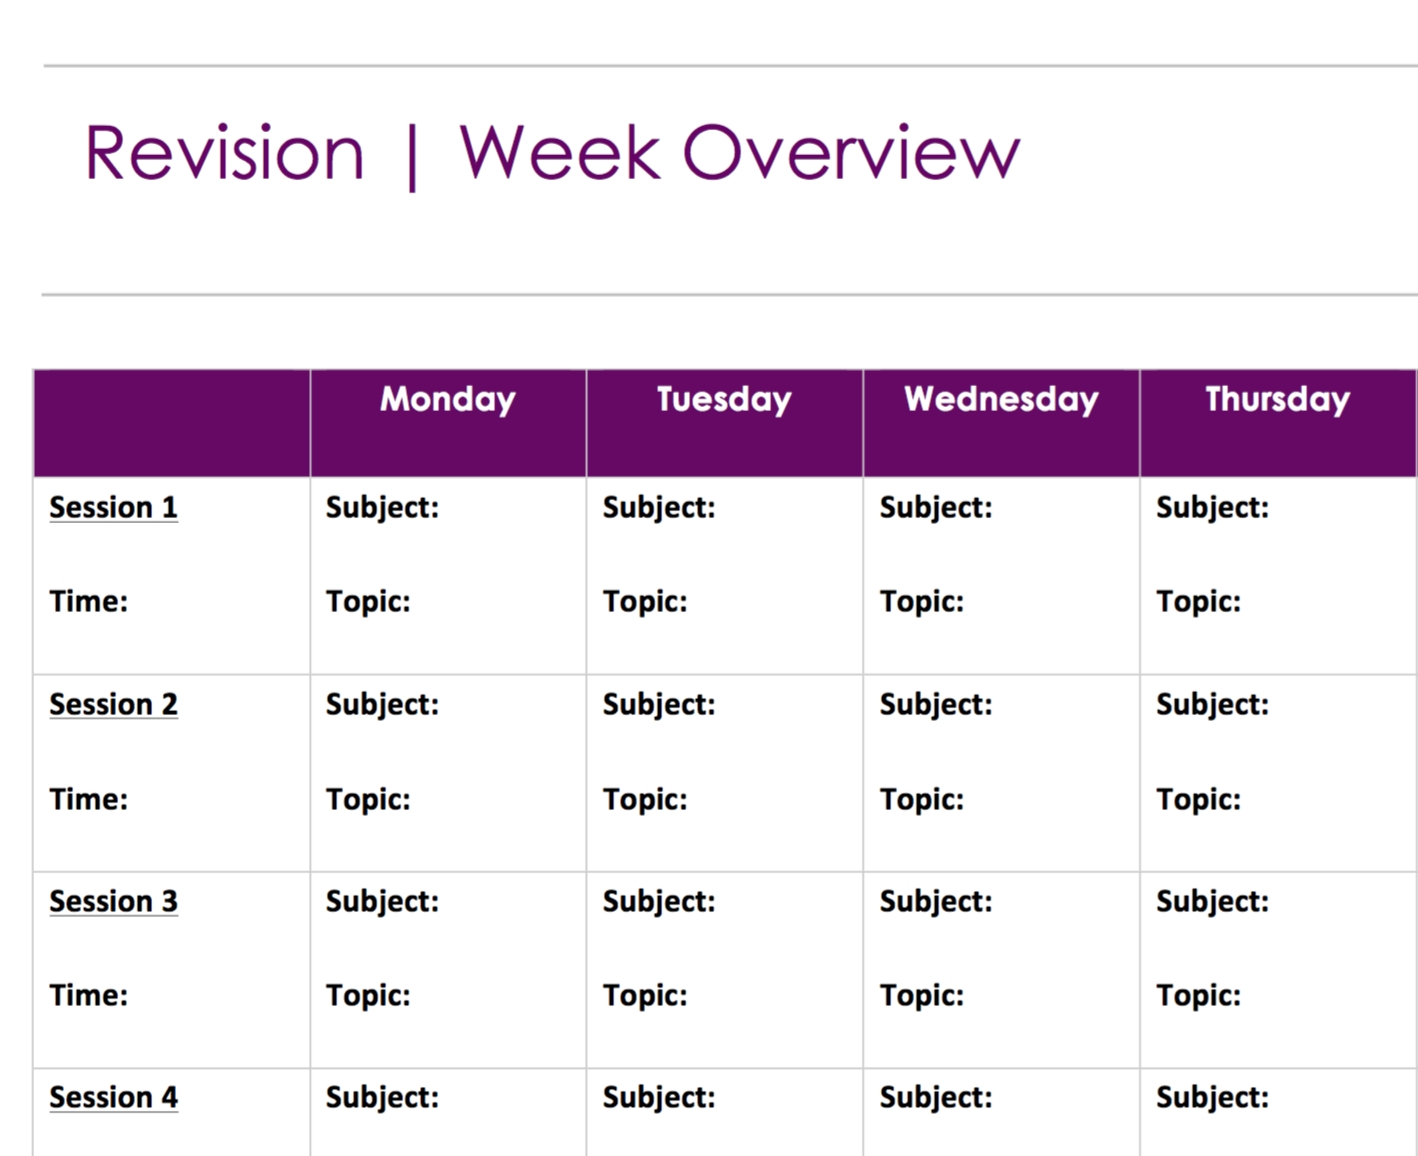 Free Weekly Revision Schedule Pdf - Lawyer In The Making  Monday Through Friday Scheule Pdf